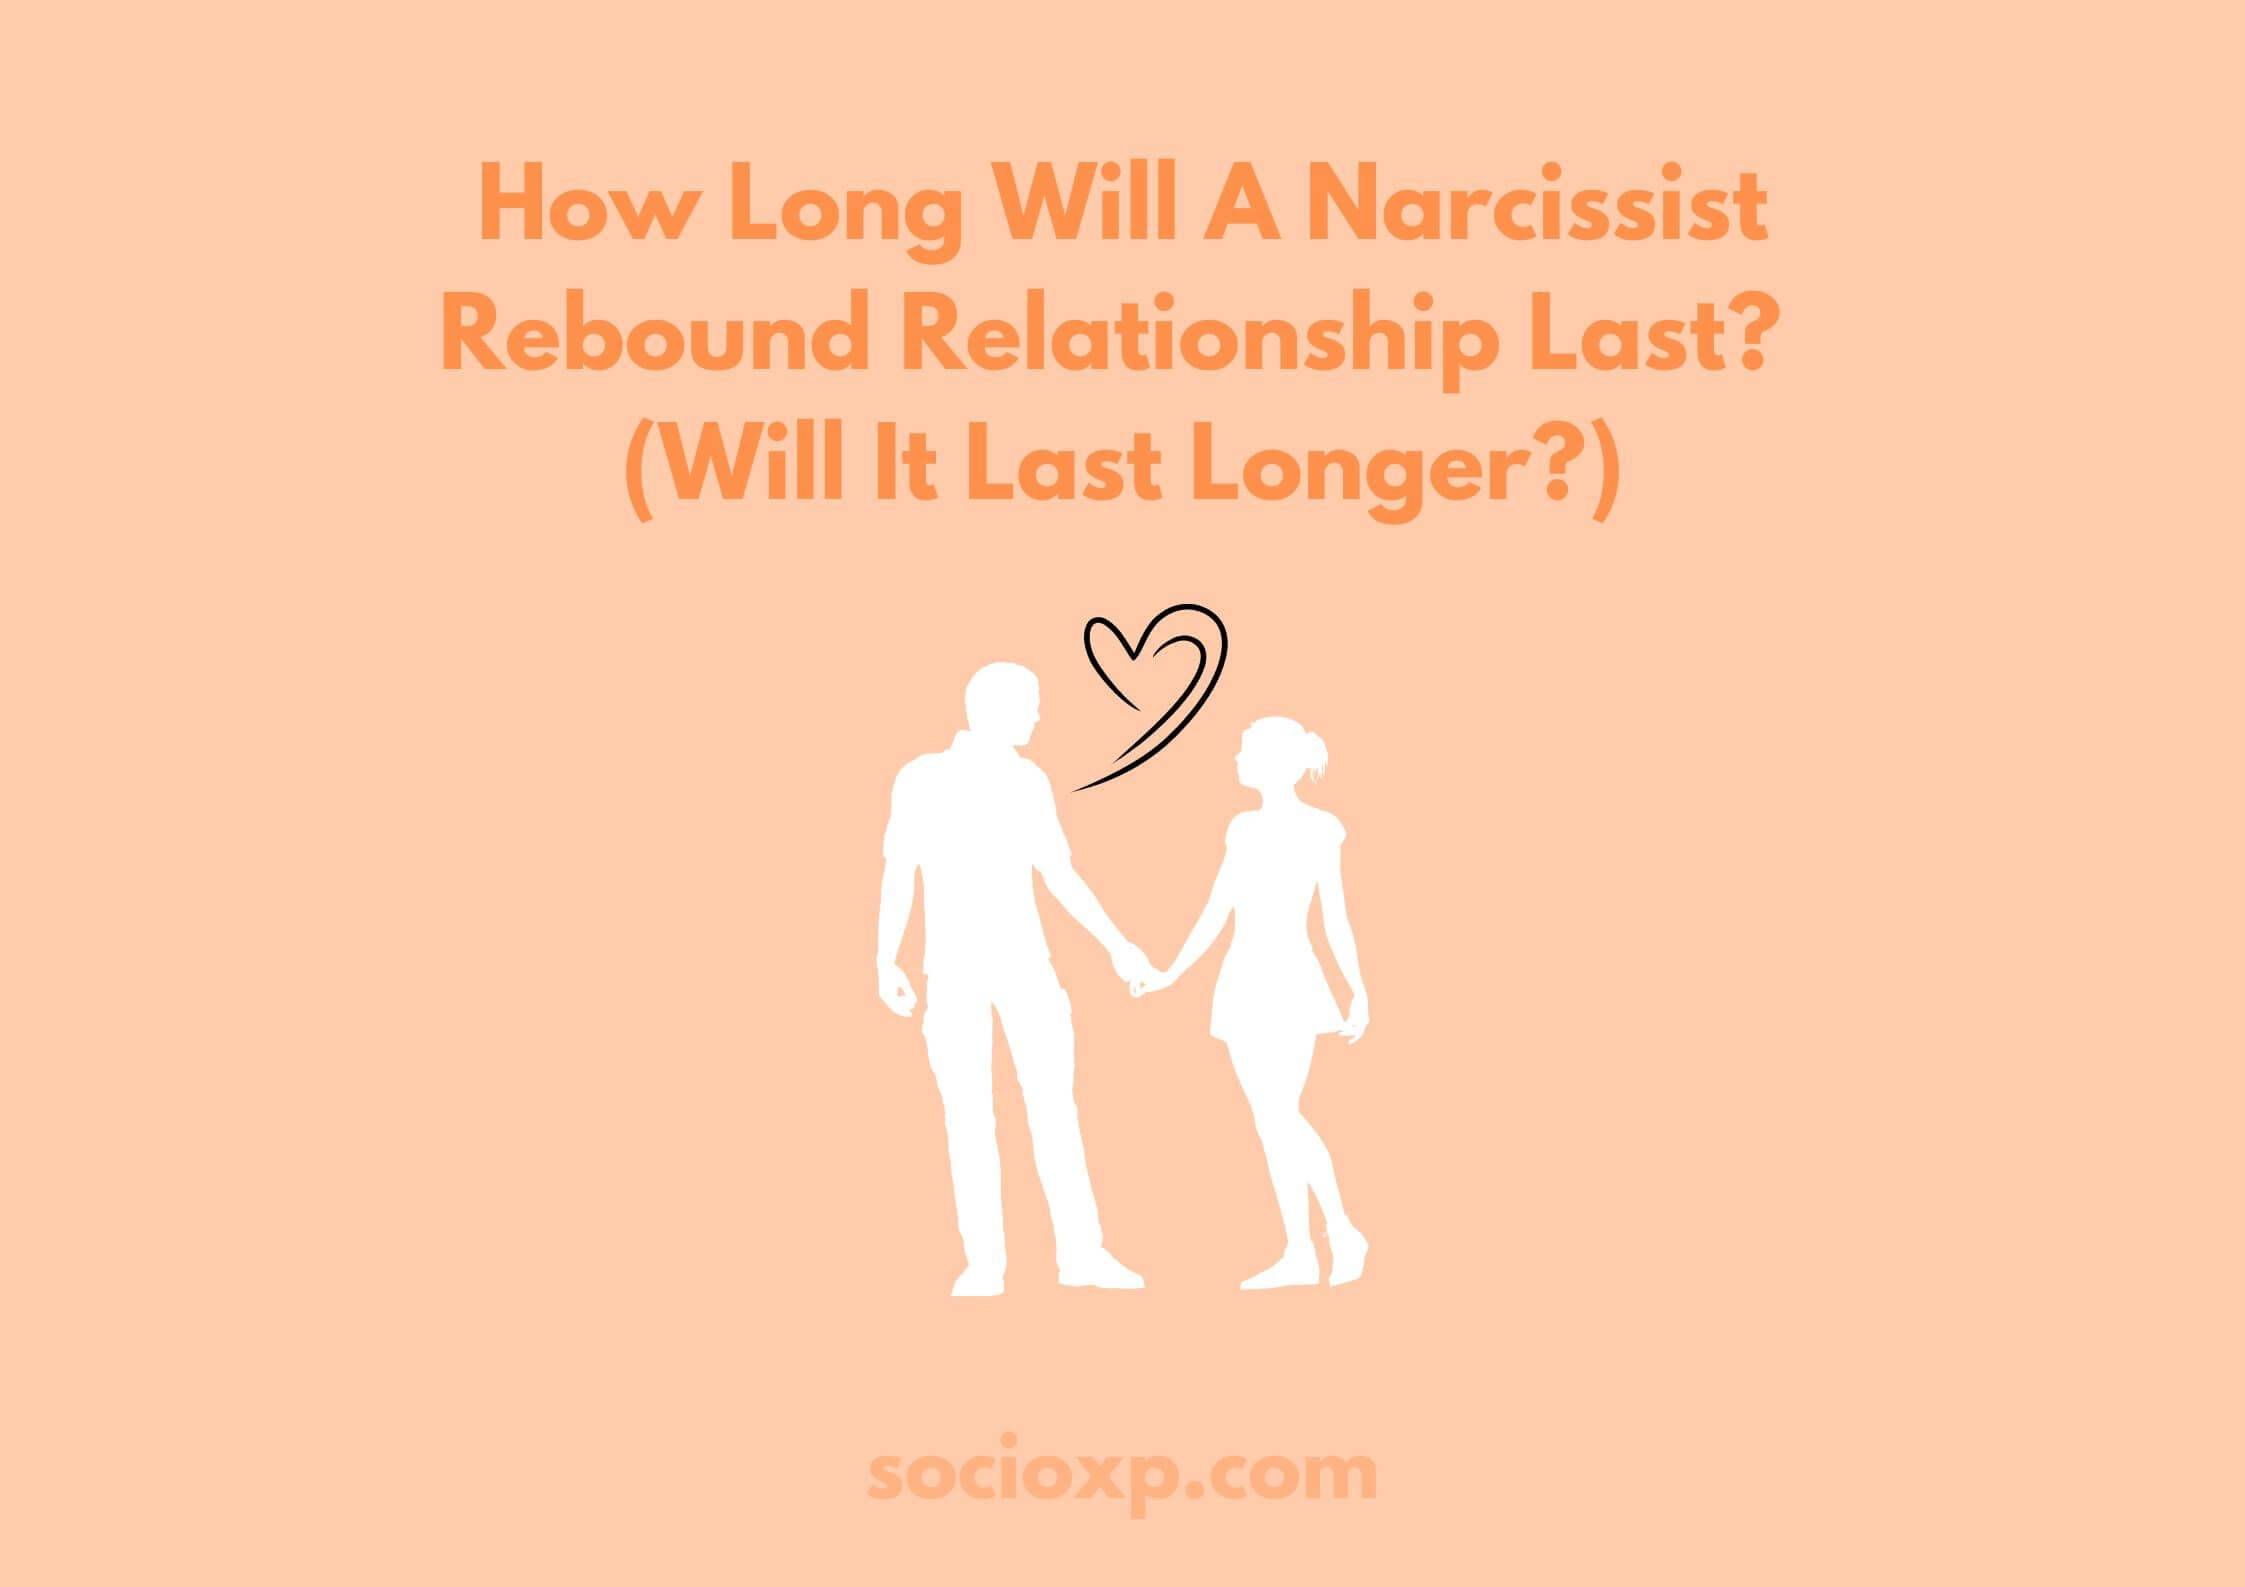 How Long Will A Narcissist Rebound Relationship Last? (Will It Last Longer?)